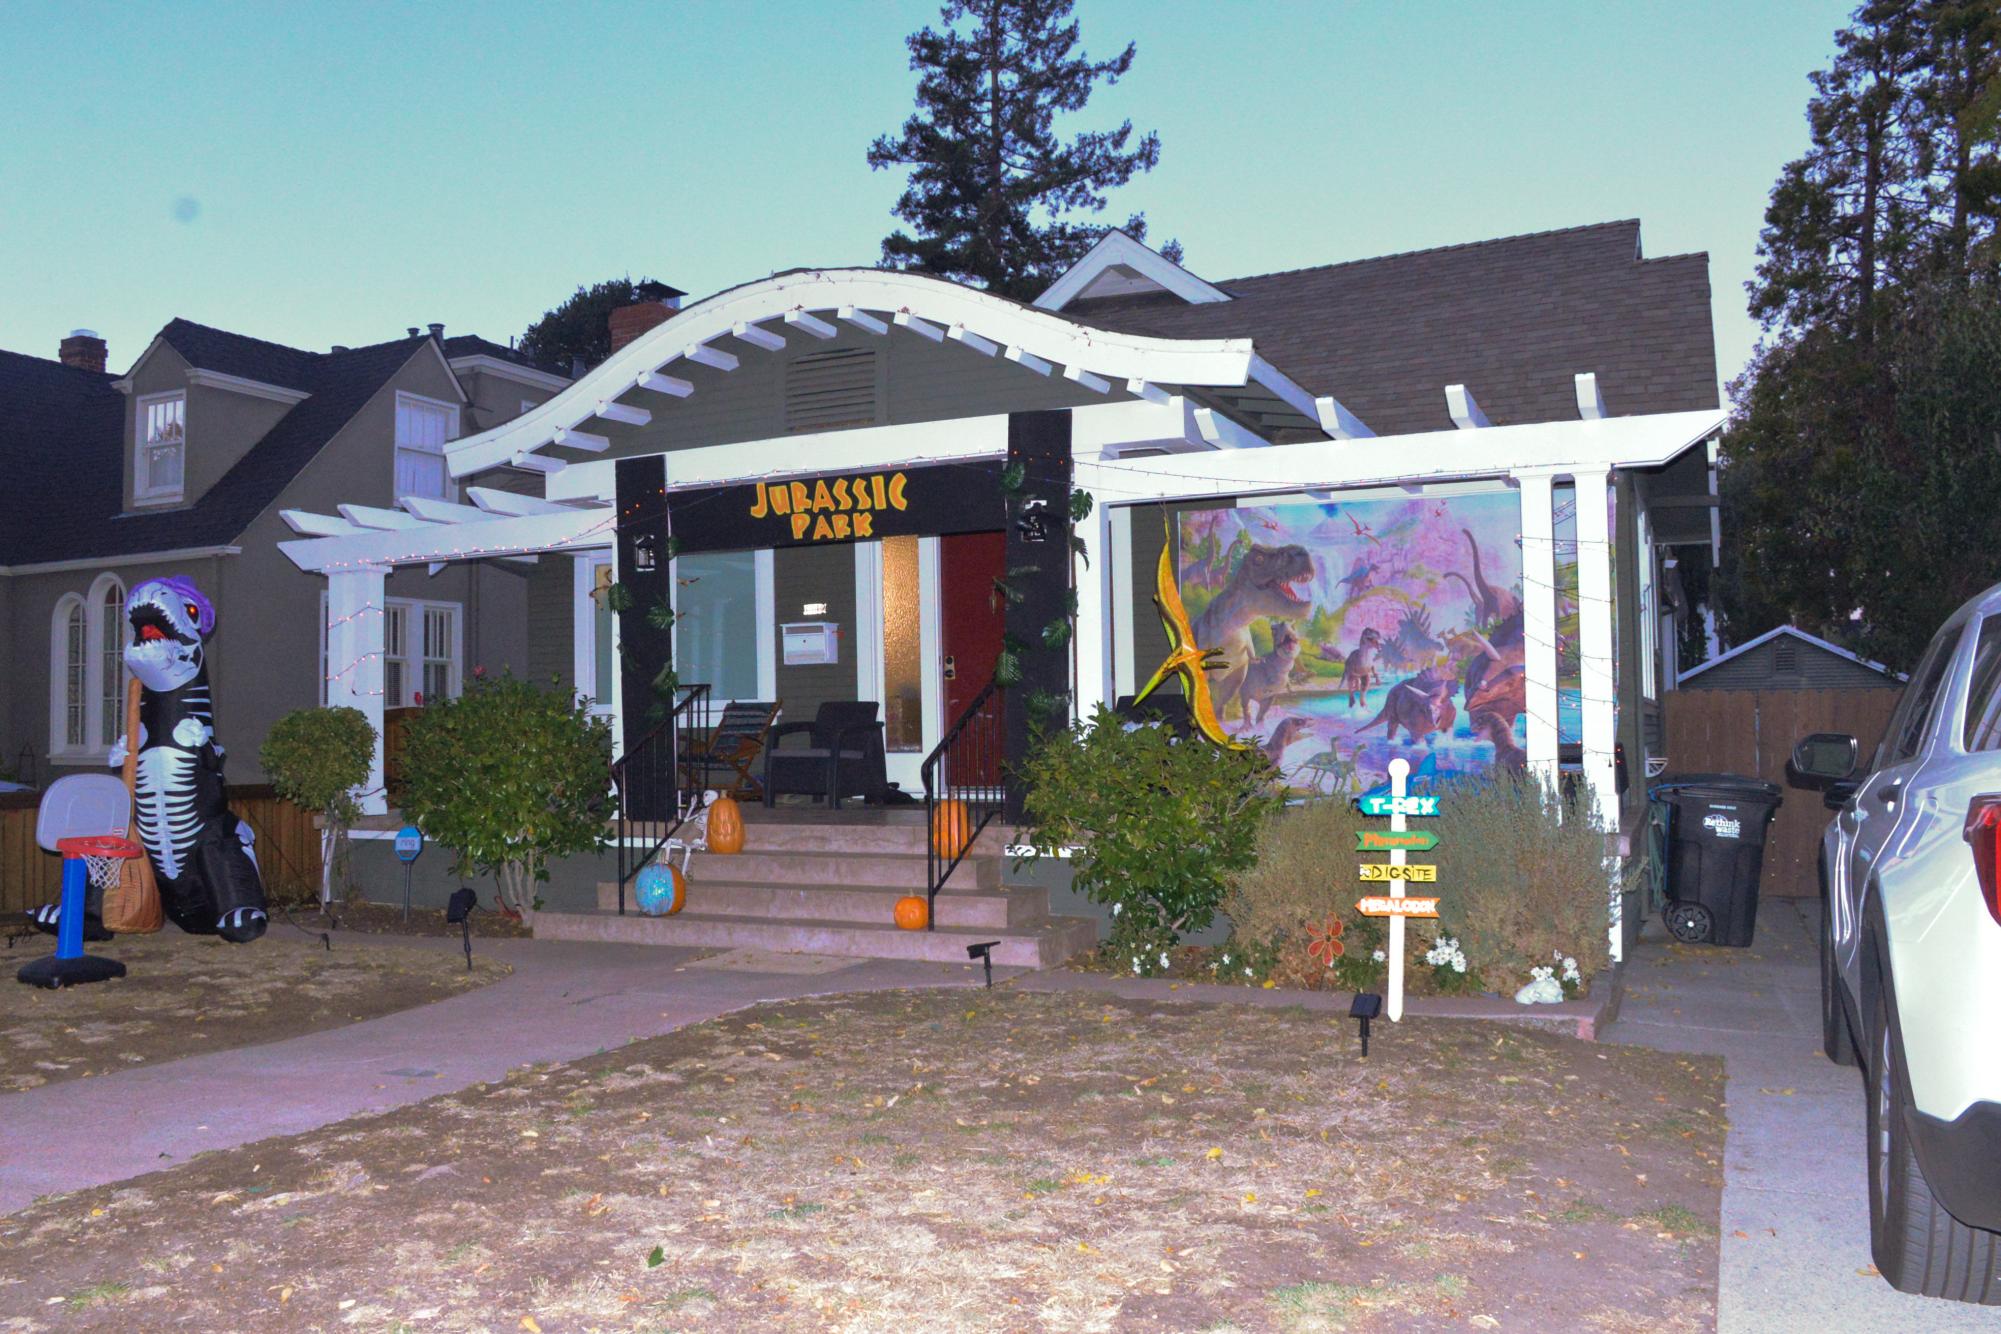 Halloween+on+Cabrillo+Avenue%3A+Residents+prepare+decorations%2C+trick-or-treaters+flock+to+spirited+street